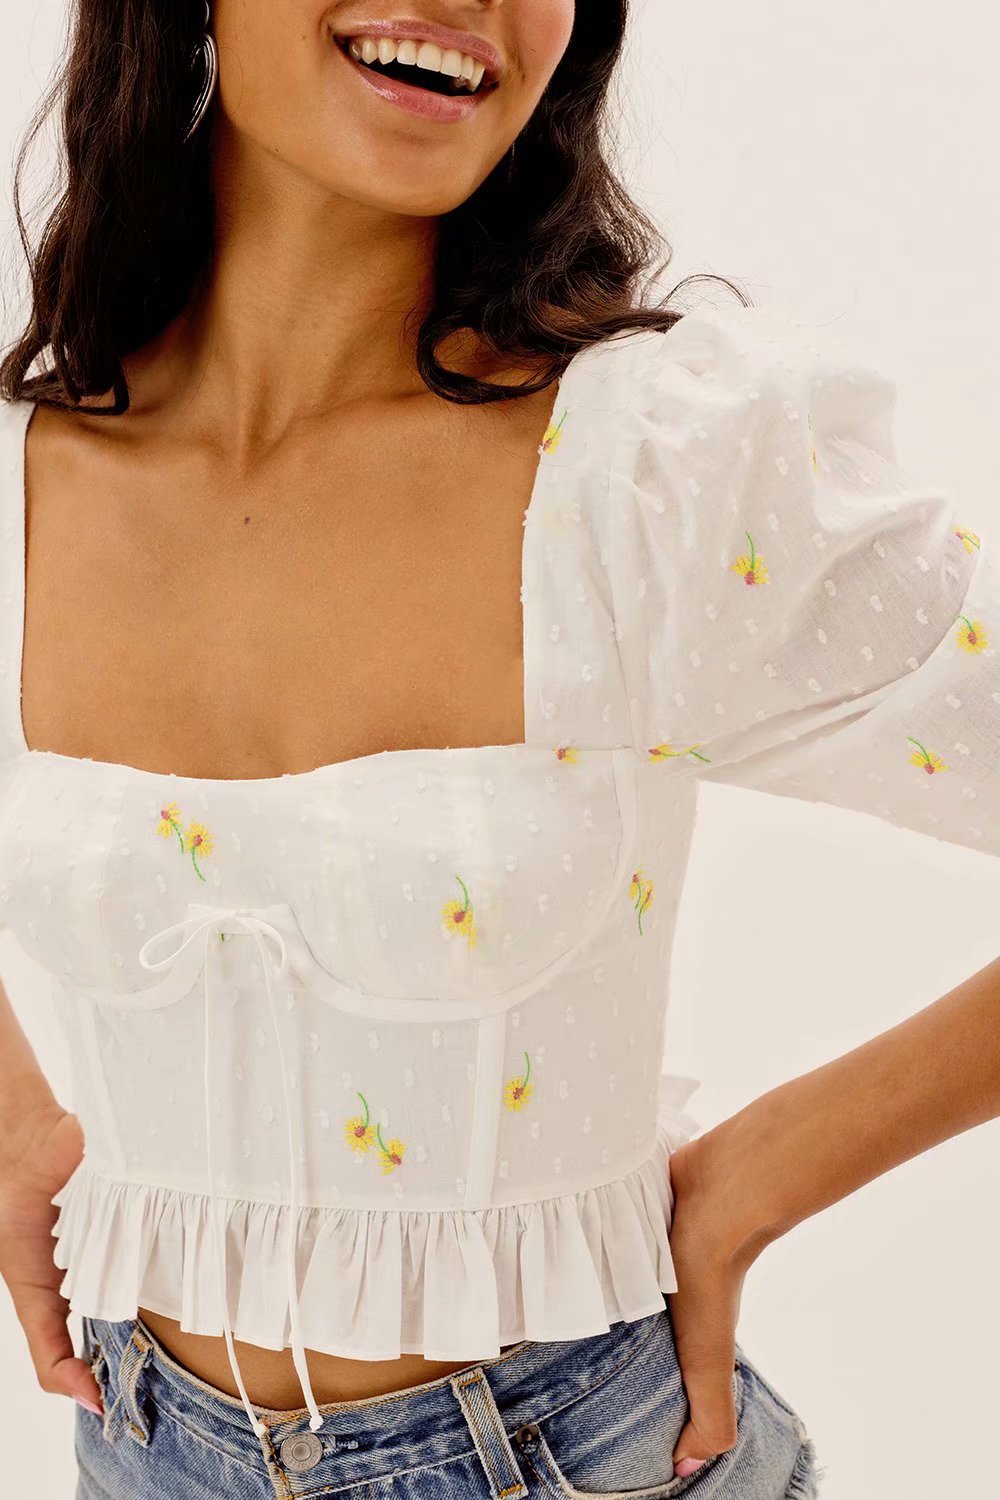 OOTDGIRL Spring And Summer Blouses Women New Retro Daisy Embroidery Ruffled Short Sleeve Corset Shirt Top Pullover Blouse